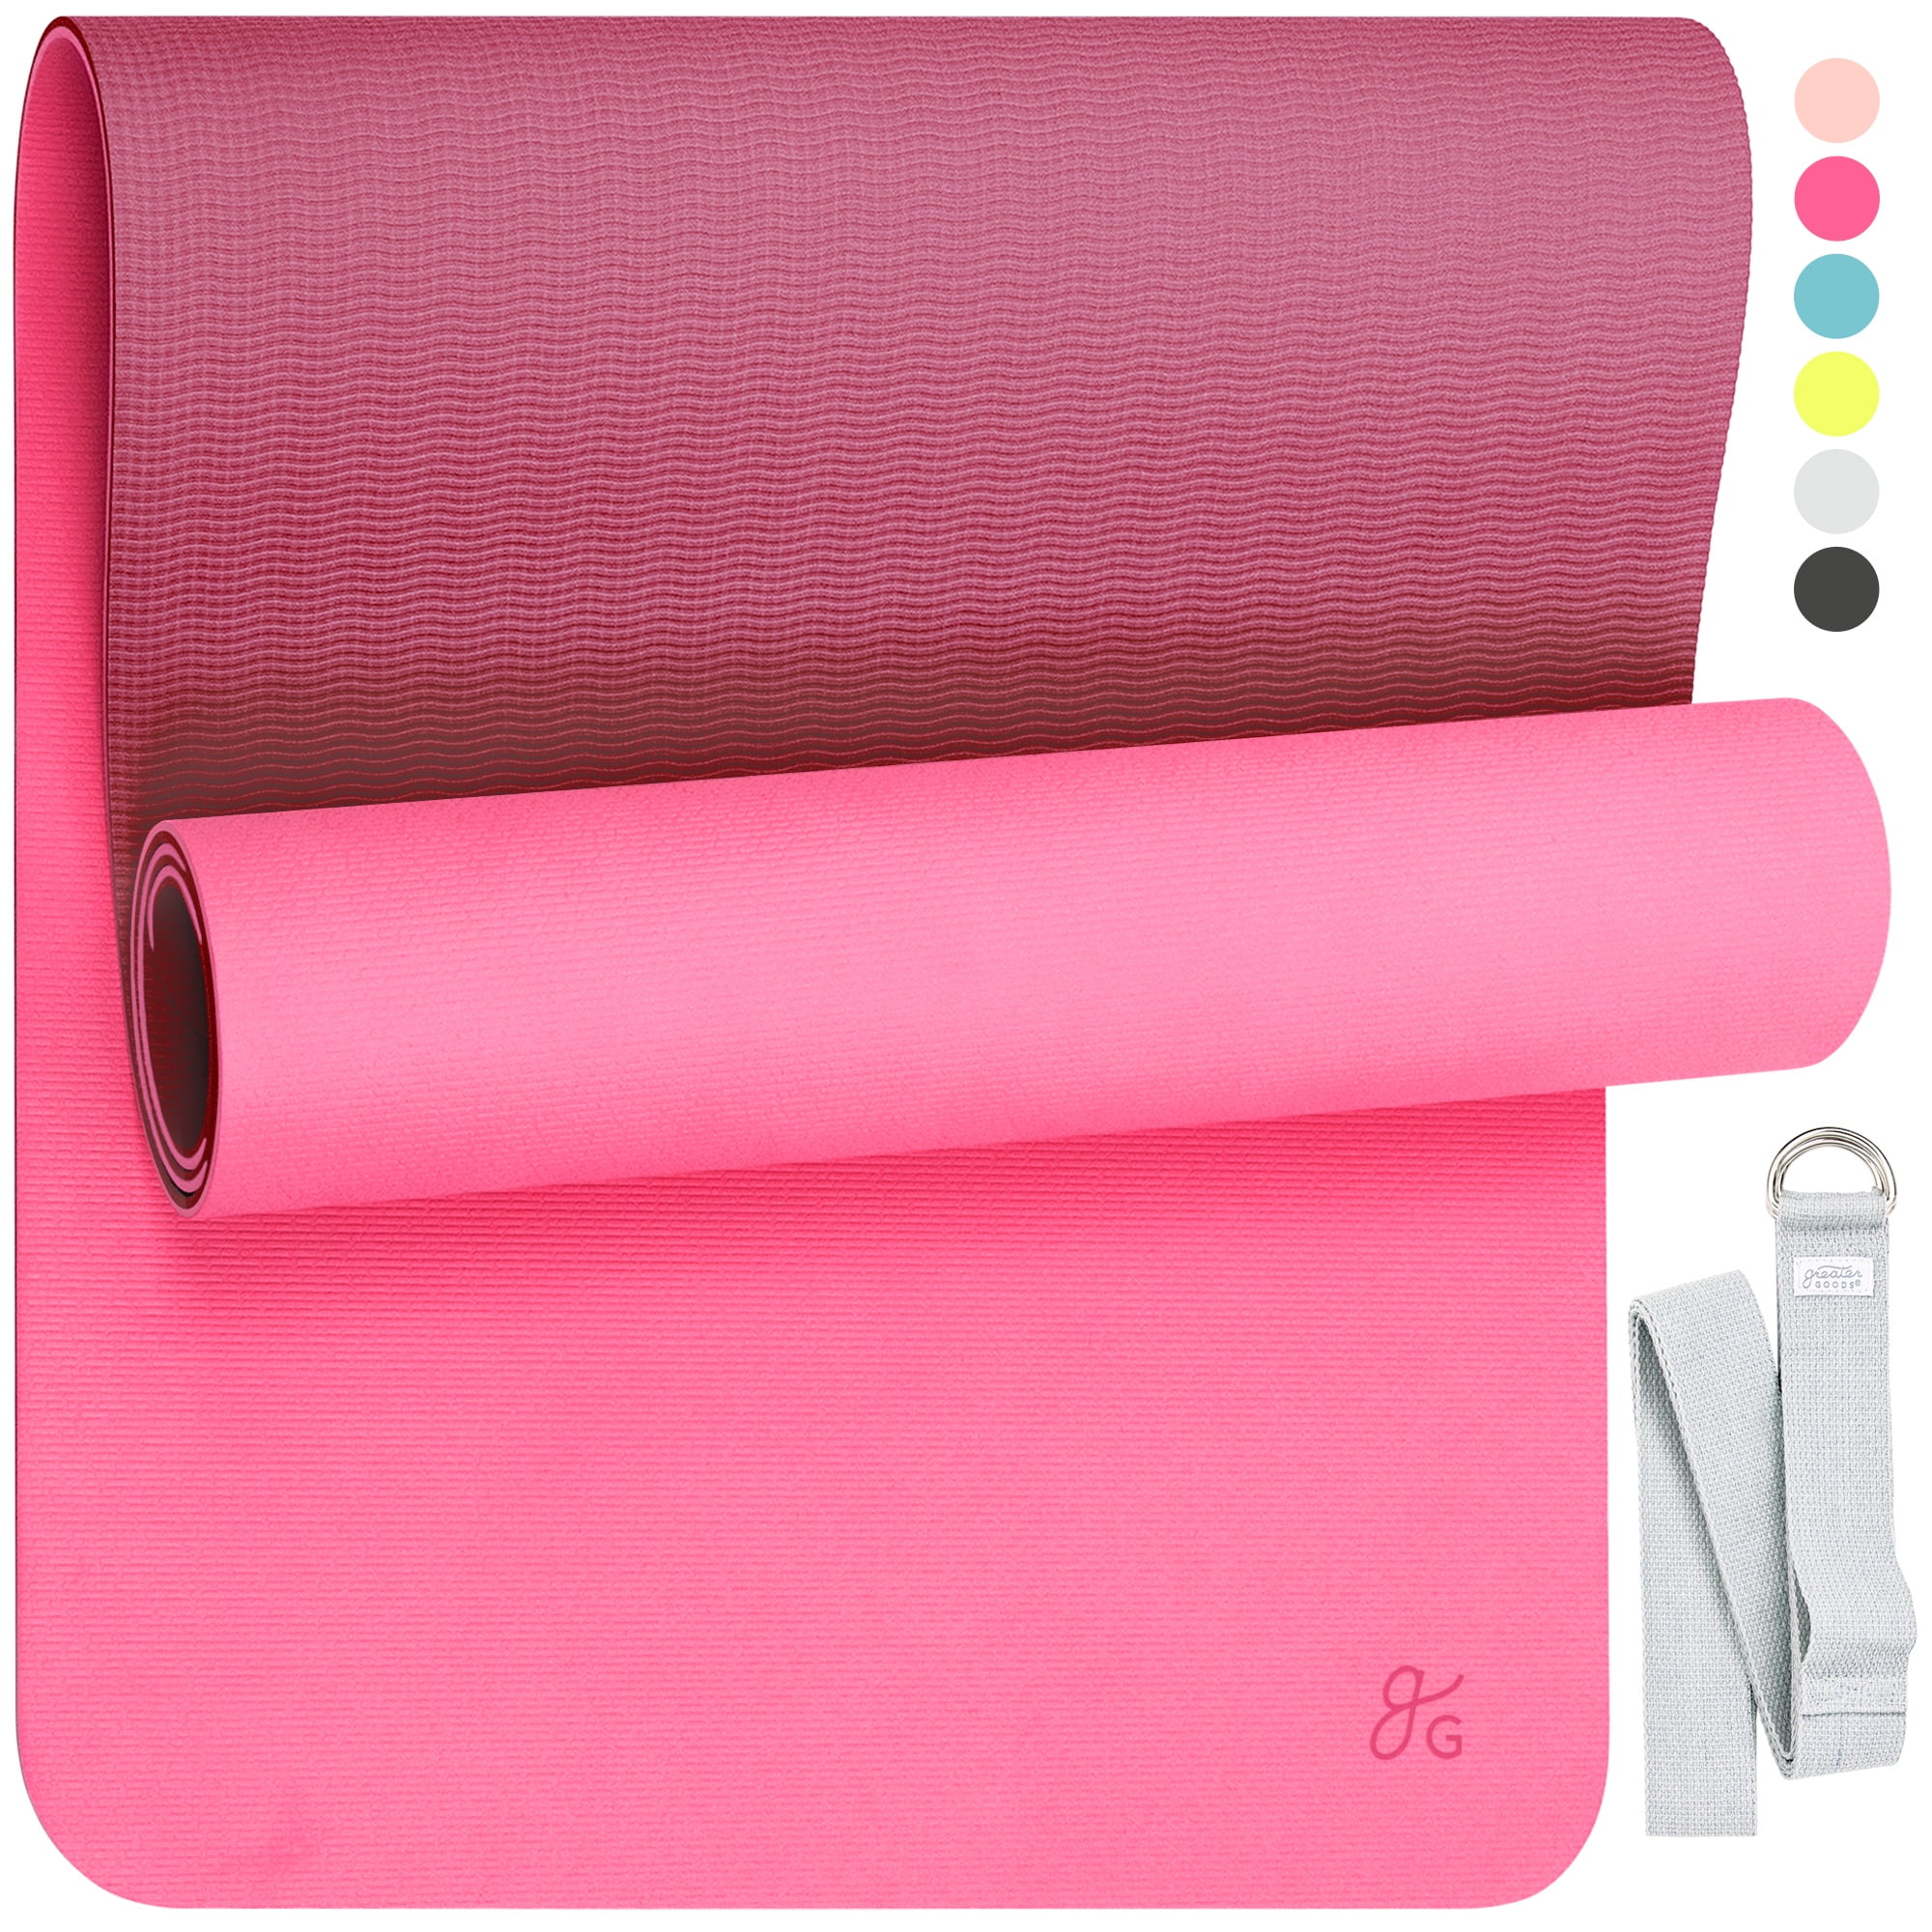 Extra Thick Yoga Mat - 0.5-inch-thick Durable Non-slip Foam Workout Mat For  Fitness, Pilates And Floor Exercises With Carrying Strap By Wakeman (pink)  : Target